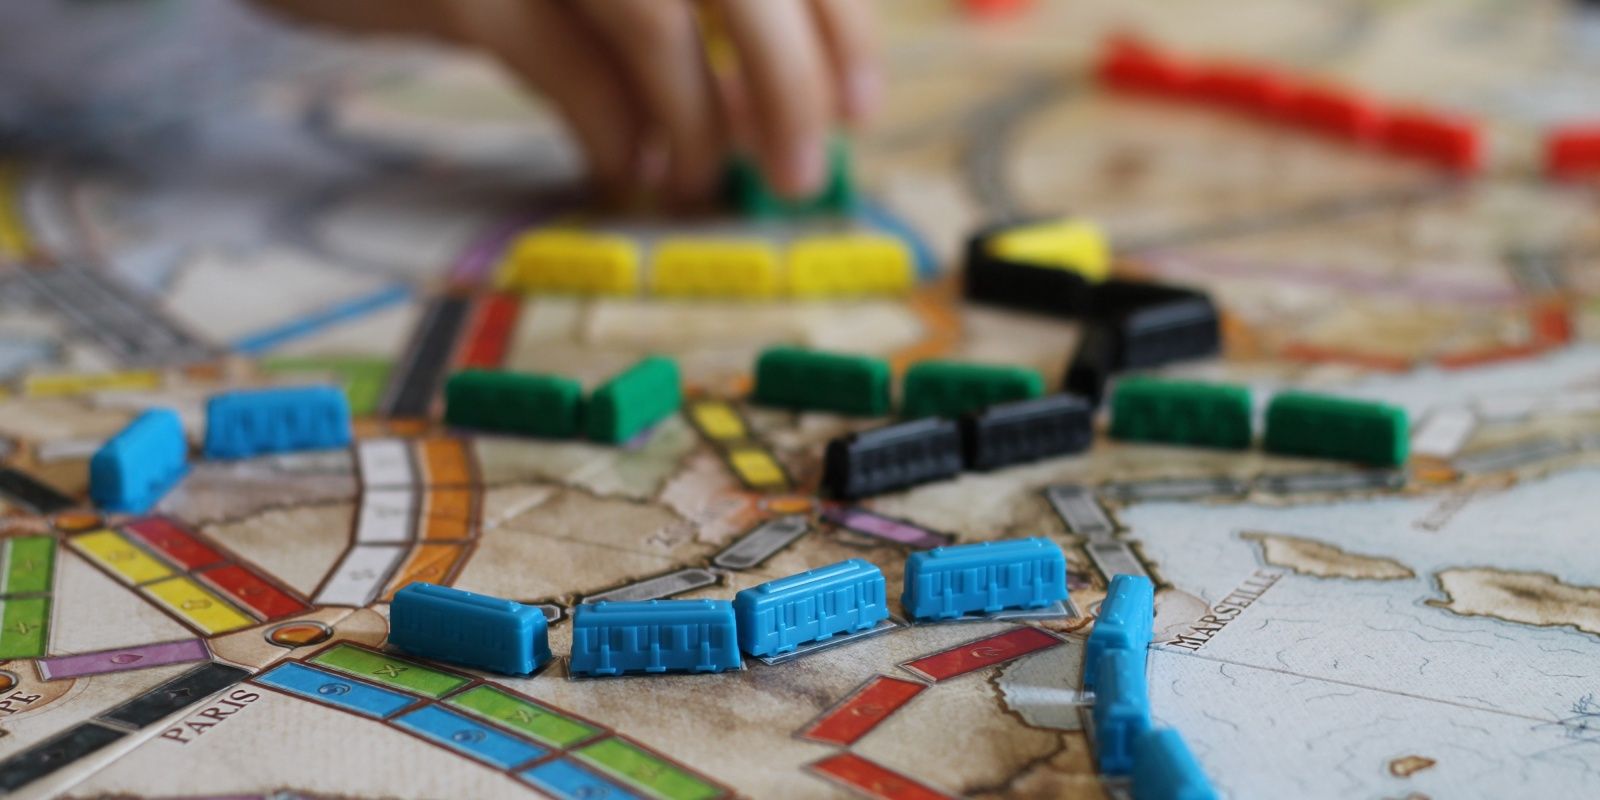 An in-progress game of Ticket to Ride